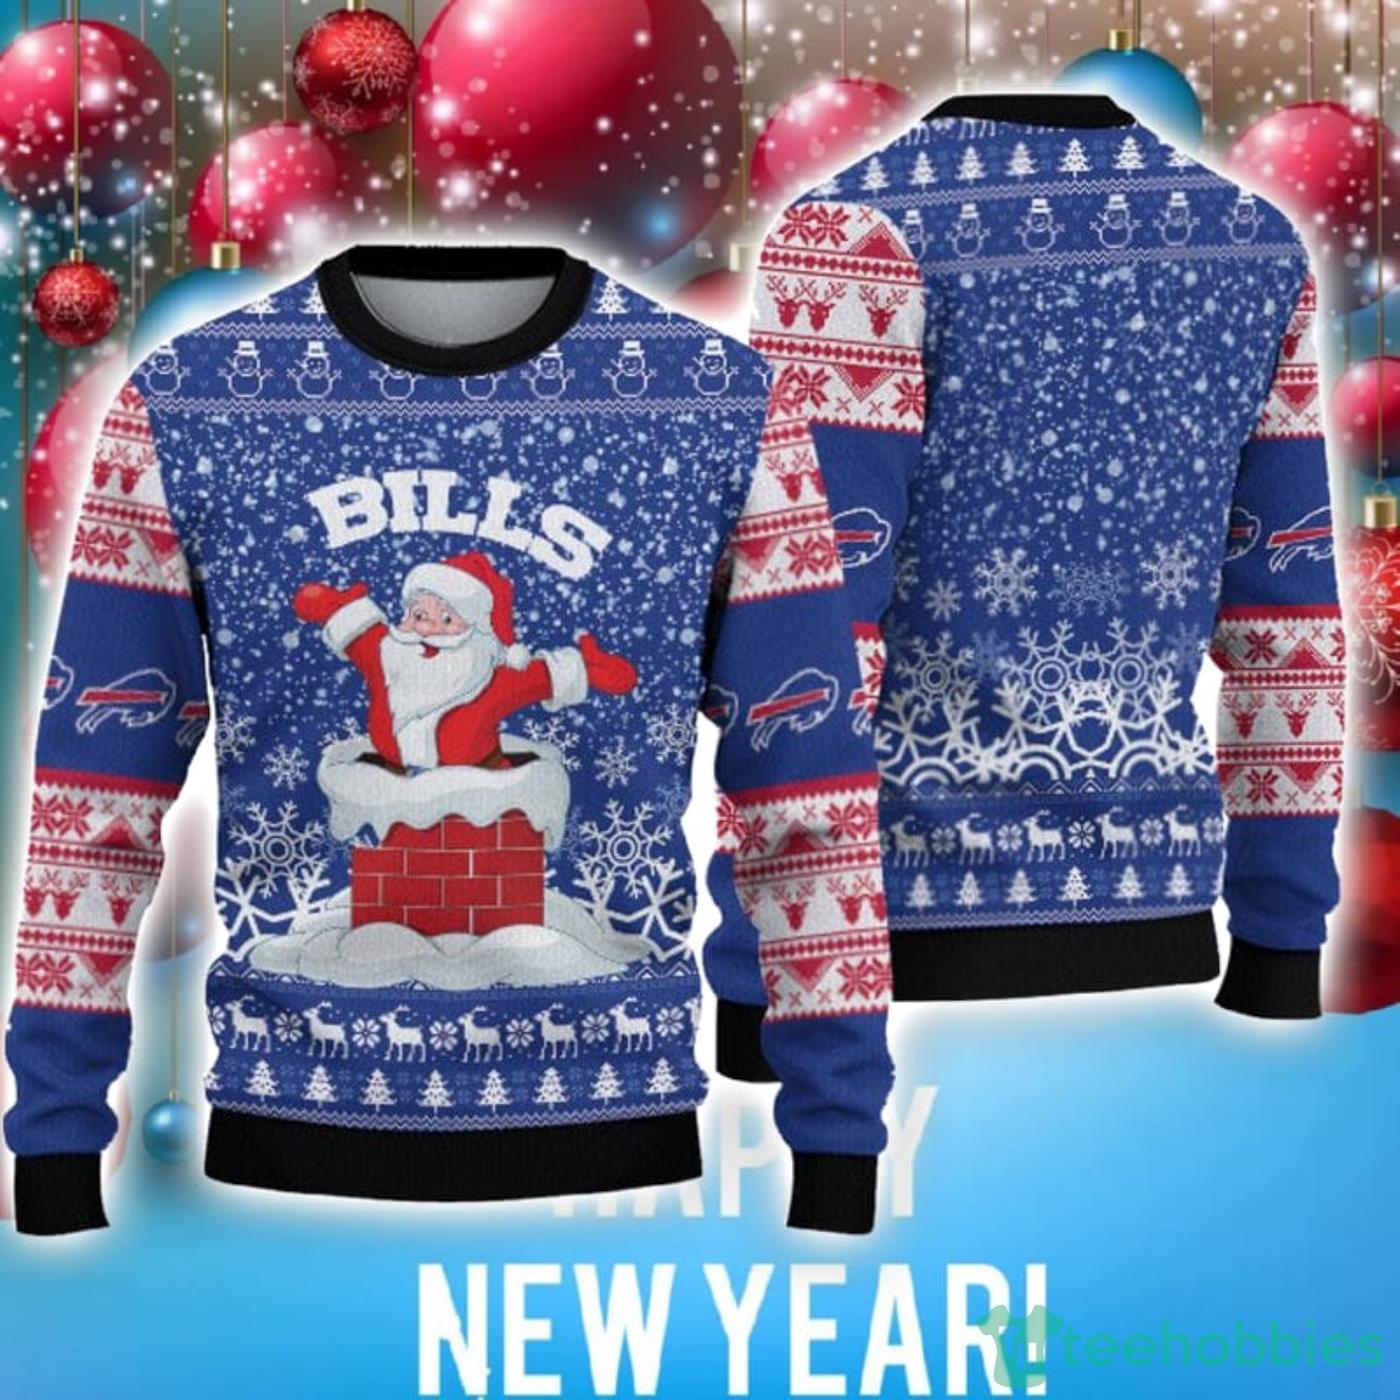 Buffalo Bills Christmas Santa Claus Pattern Special Trend Ugly Christmas Sweater Product Photo 1